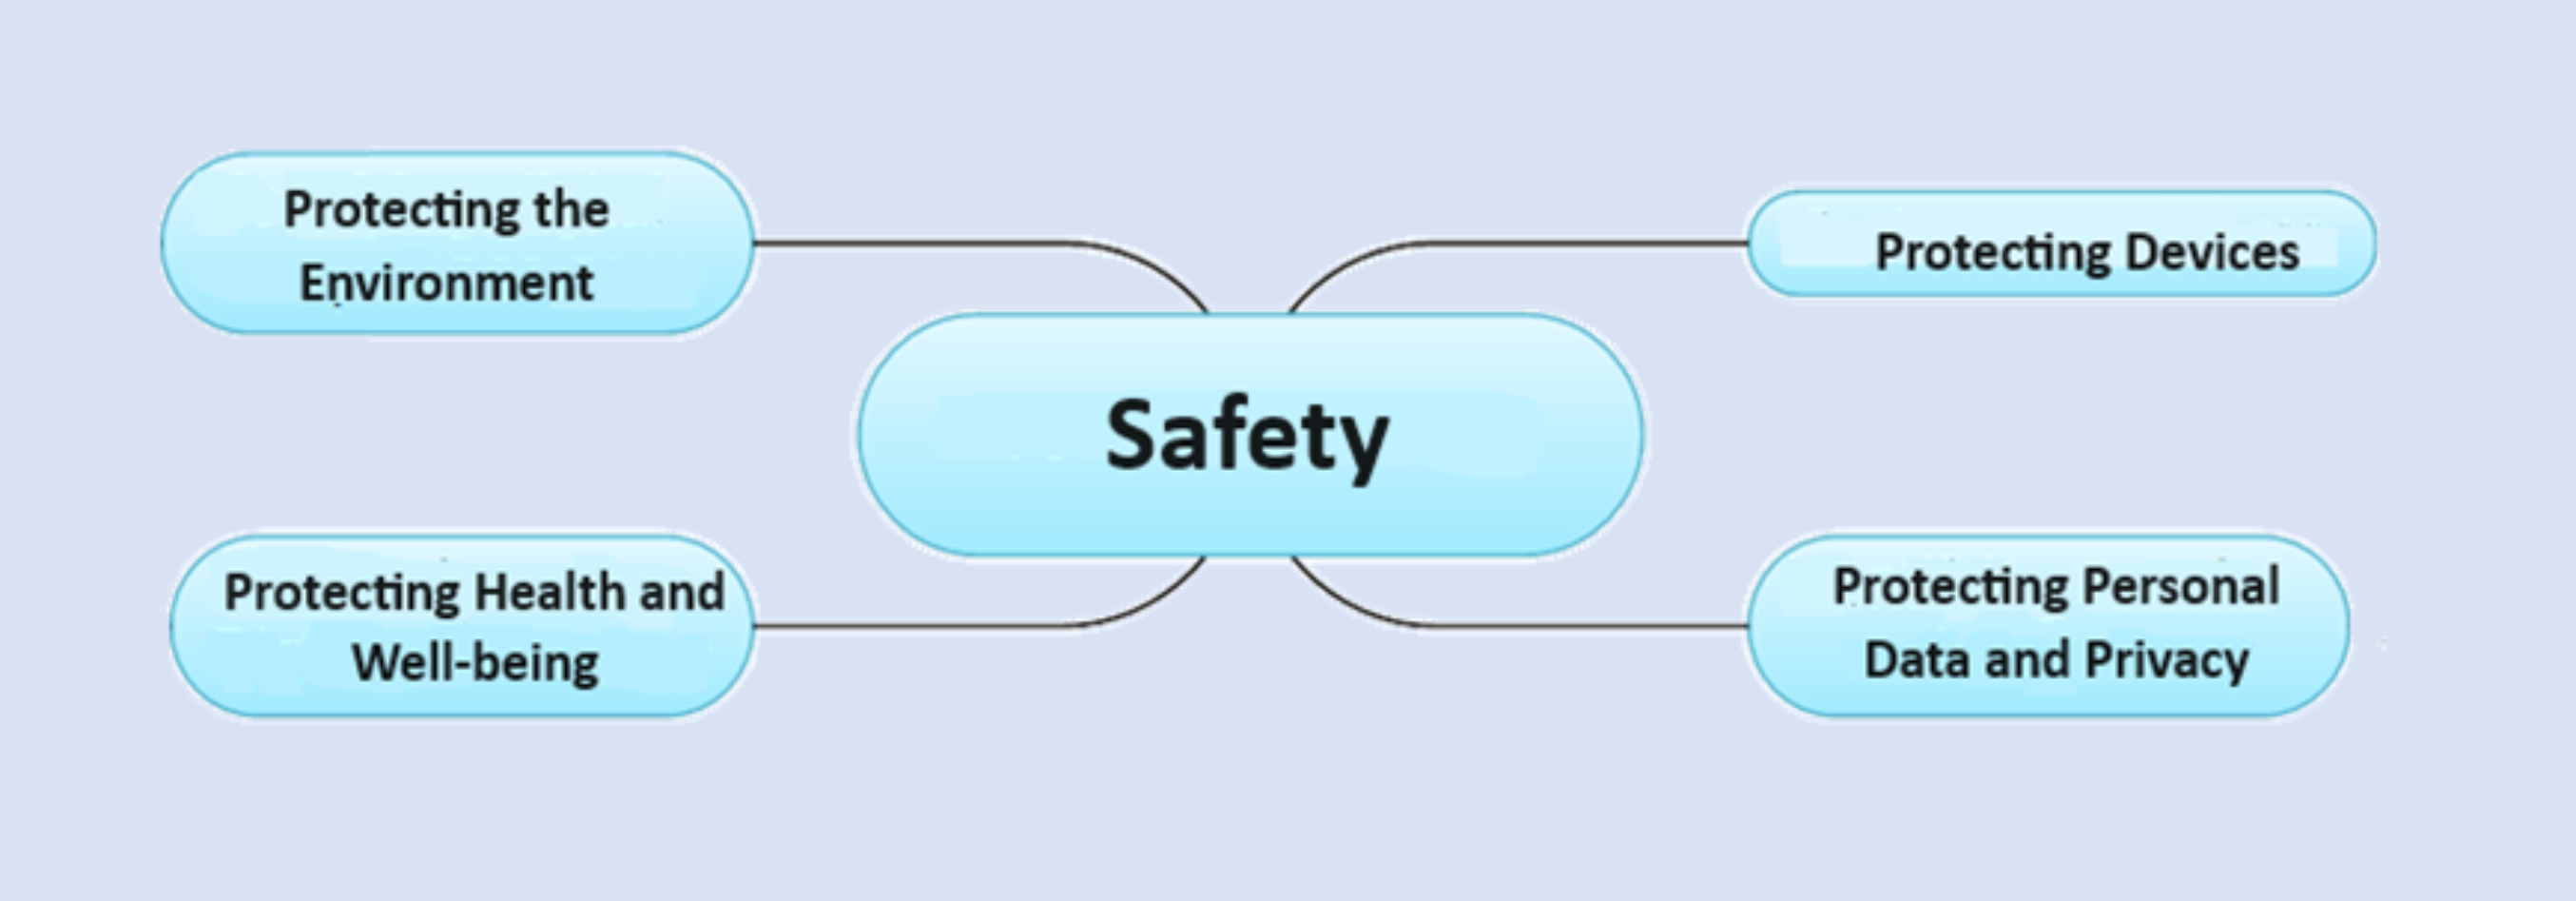 Basic structure of the Module 4: Safety